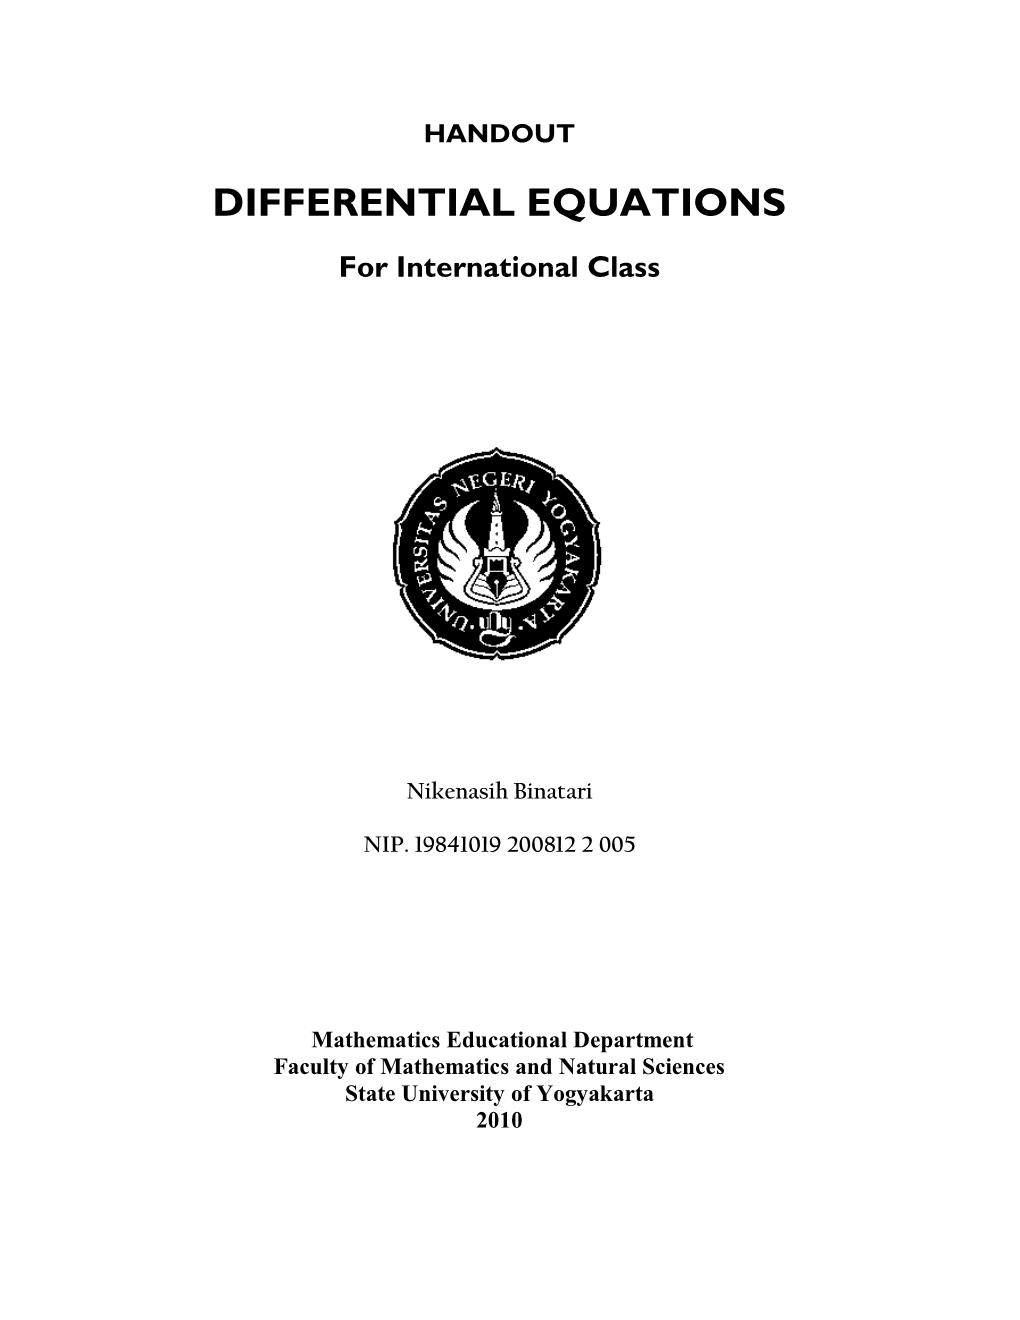 Handout of Differential Equations